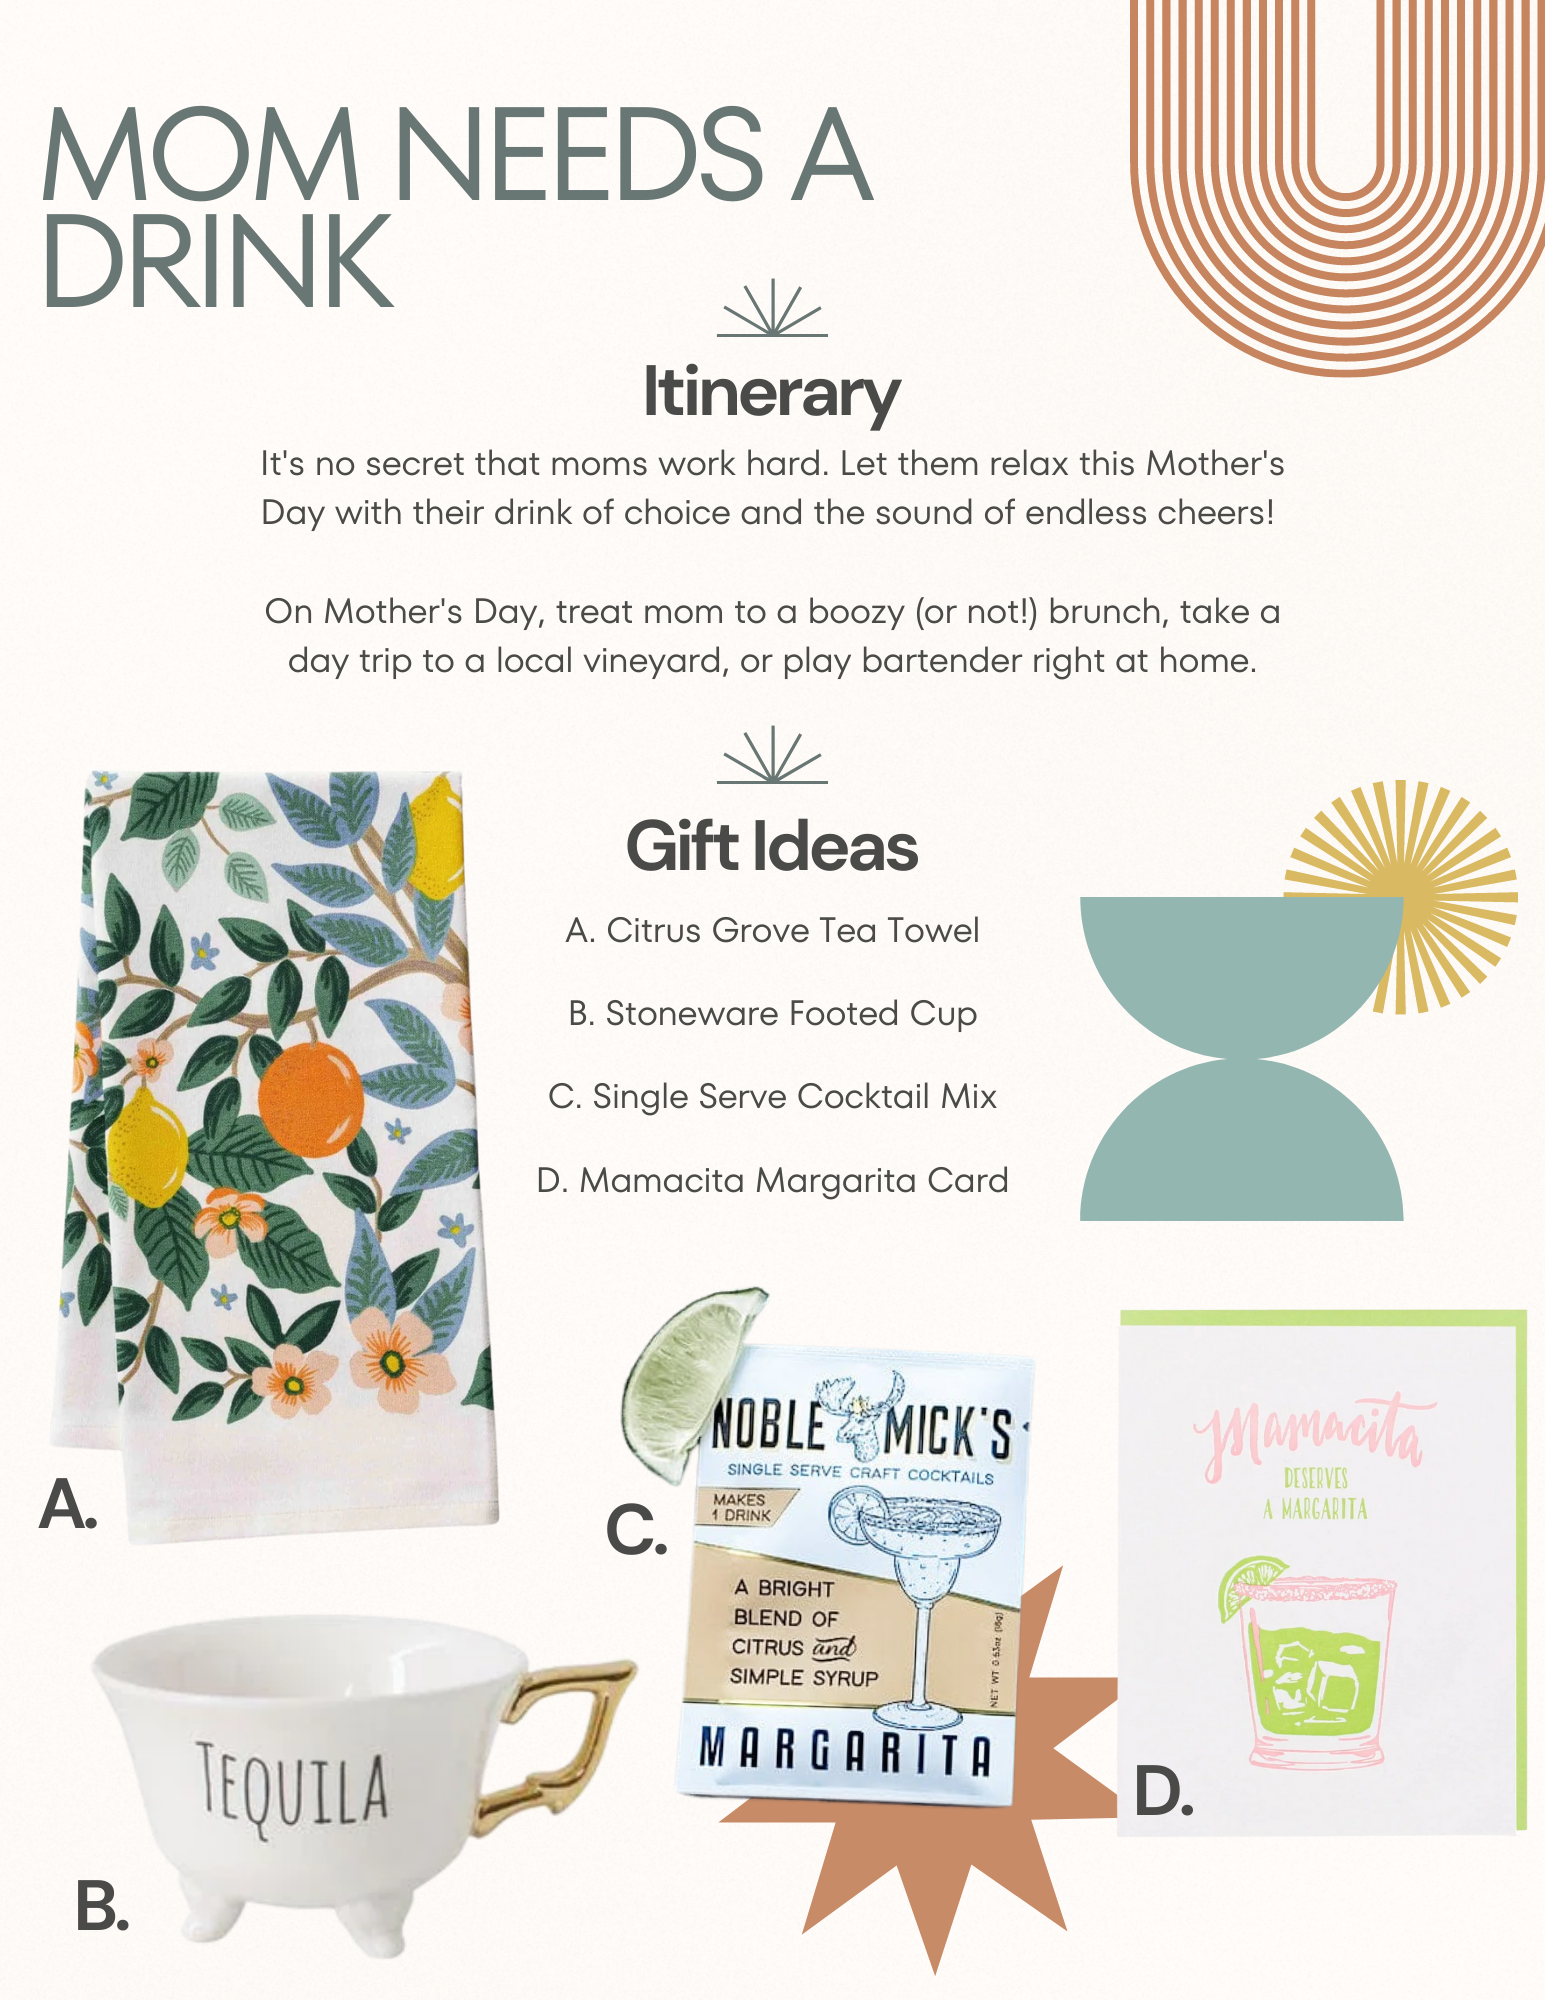 "Mom Needs a Drink." Itinerary: Go to brunch, visit a vineyard, or make drinks at home. Gift Ideas: a tea towel, a booze themed teacup, a drink mix, and a card.